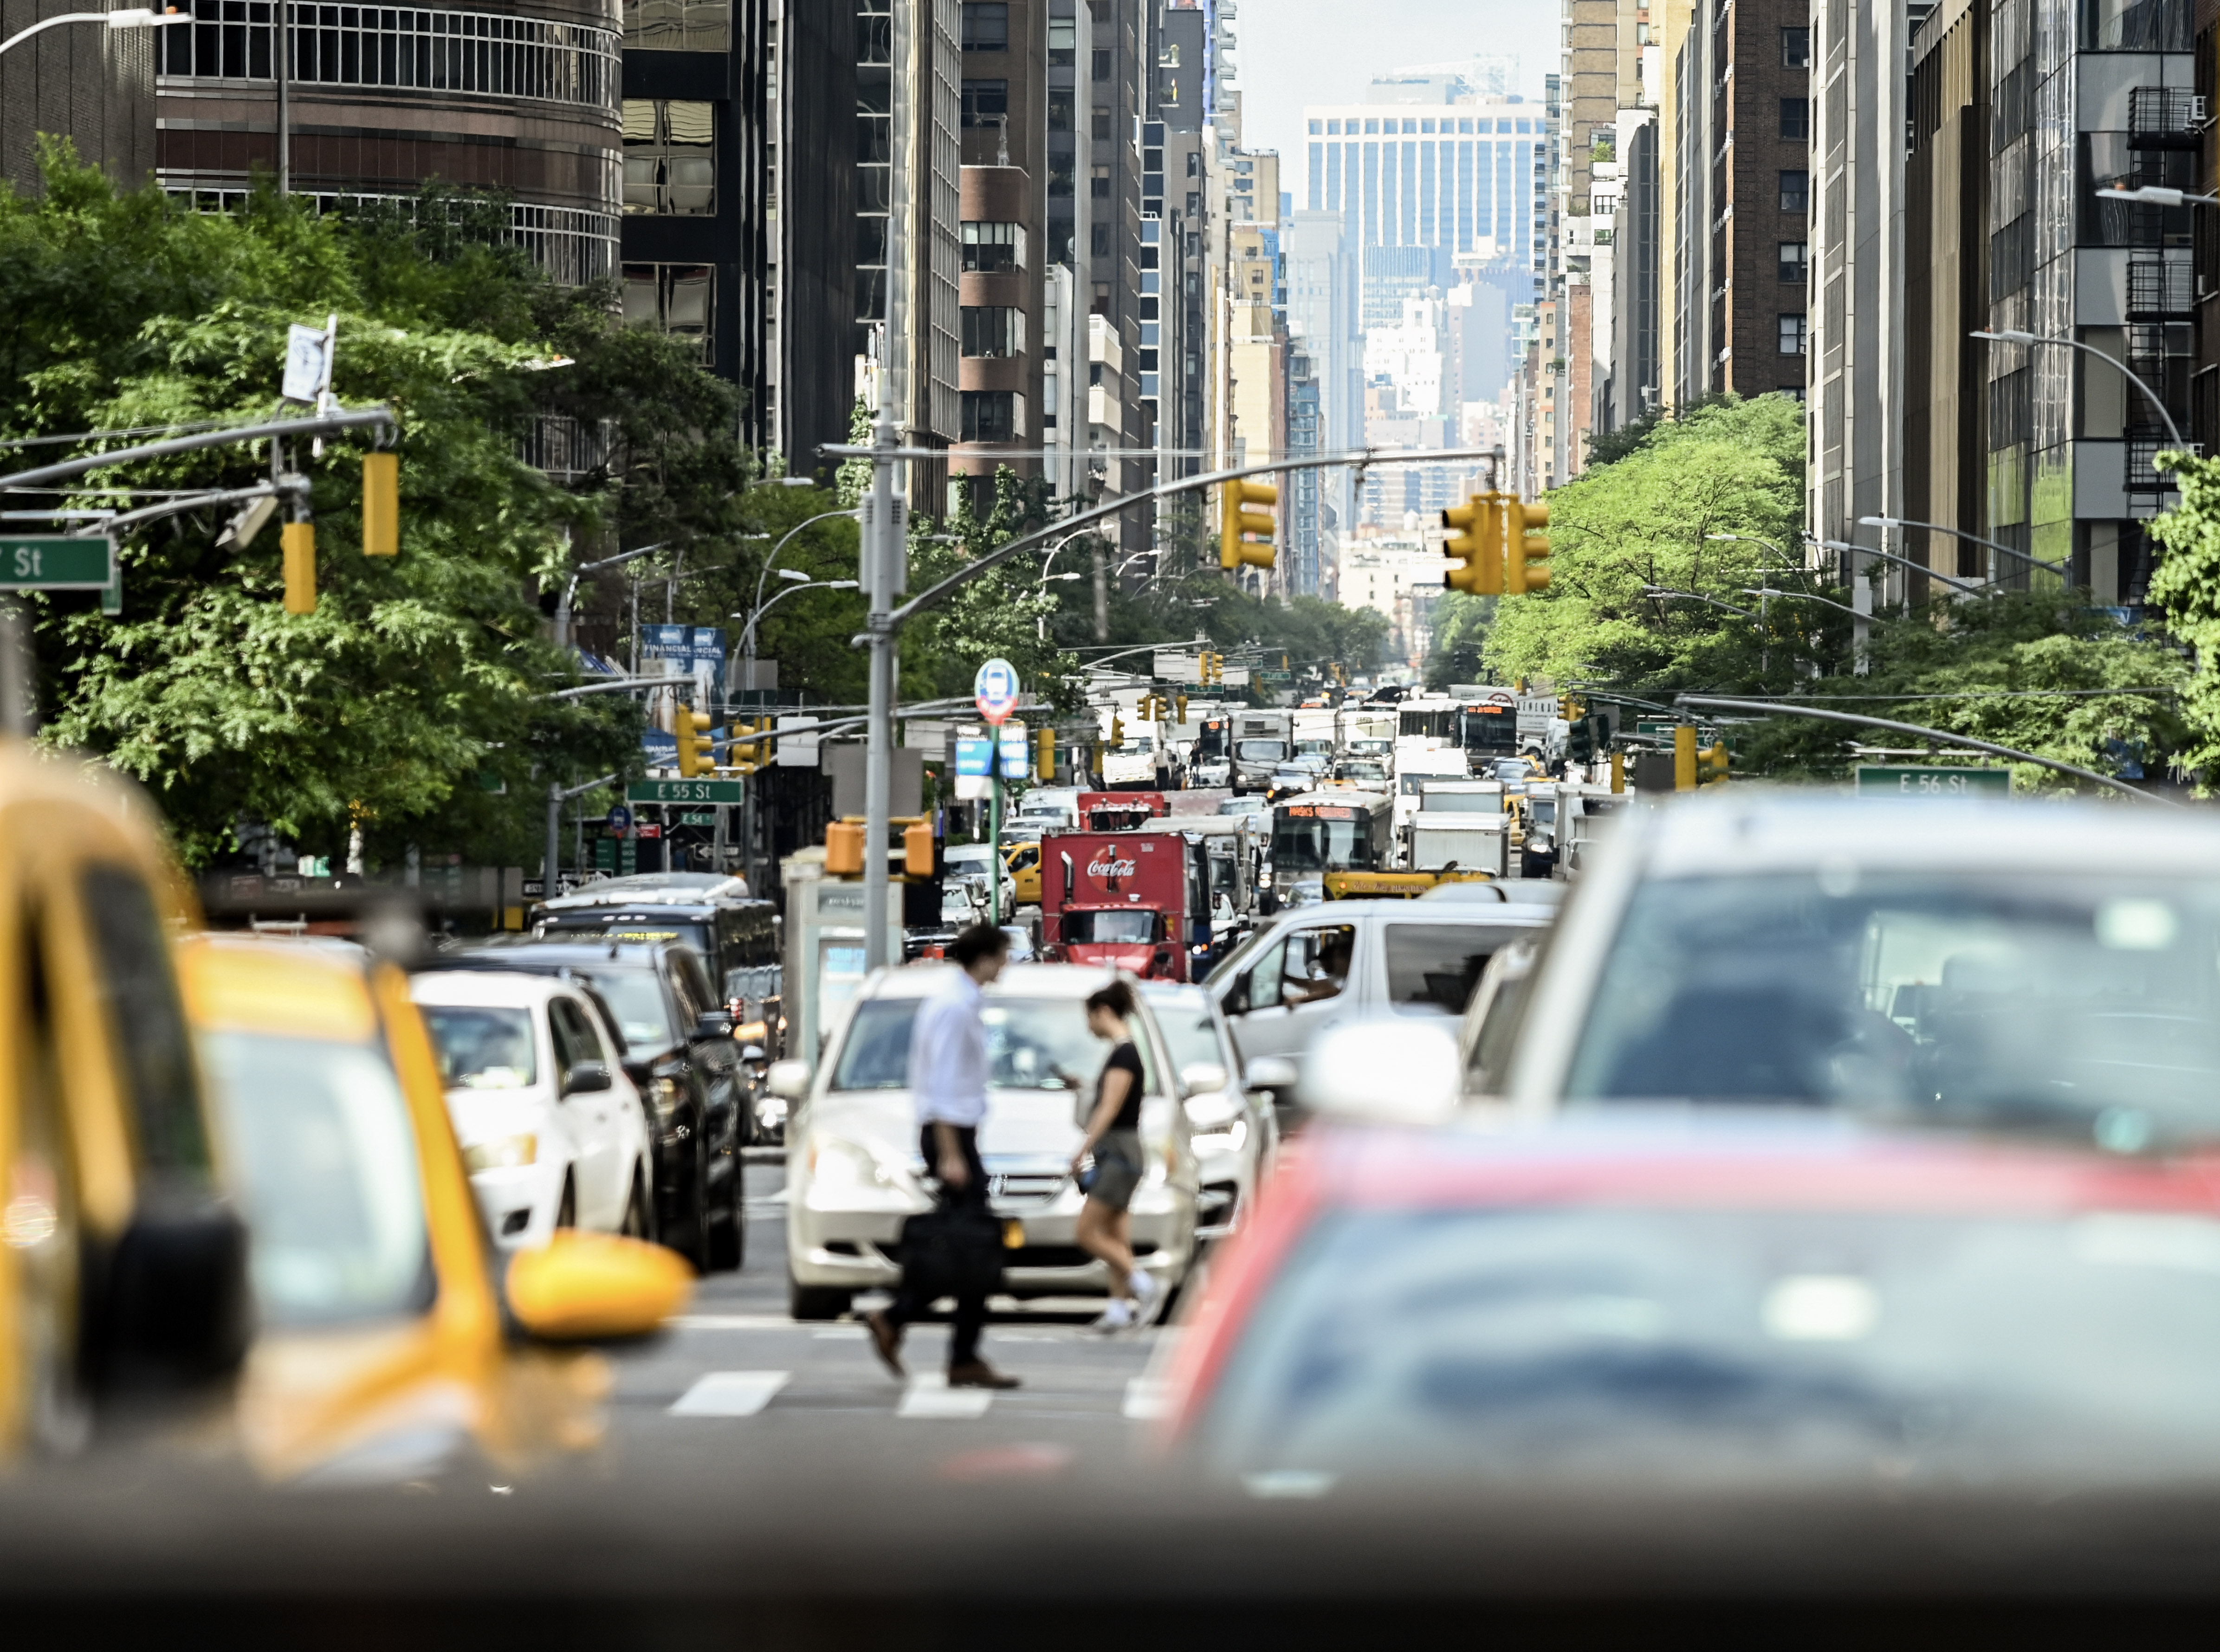 Reminder: Final Public Hearing on Proposed Congestion Pricing Program to be Held Tomorrow, Wednesday, Aug. 31 